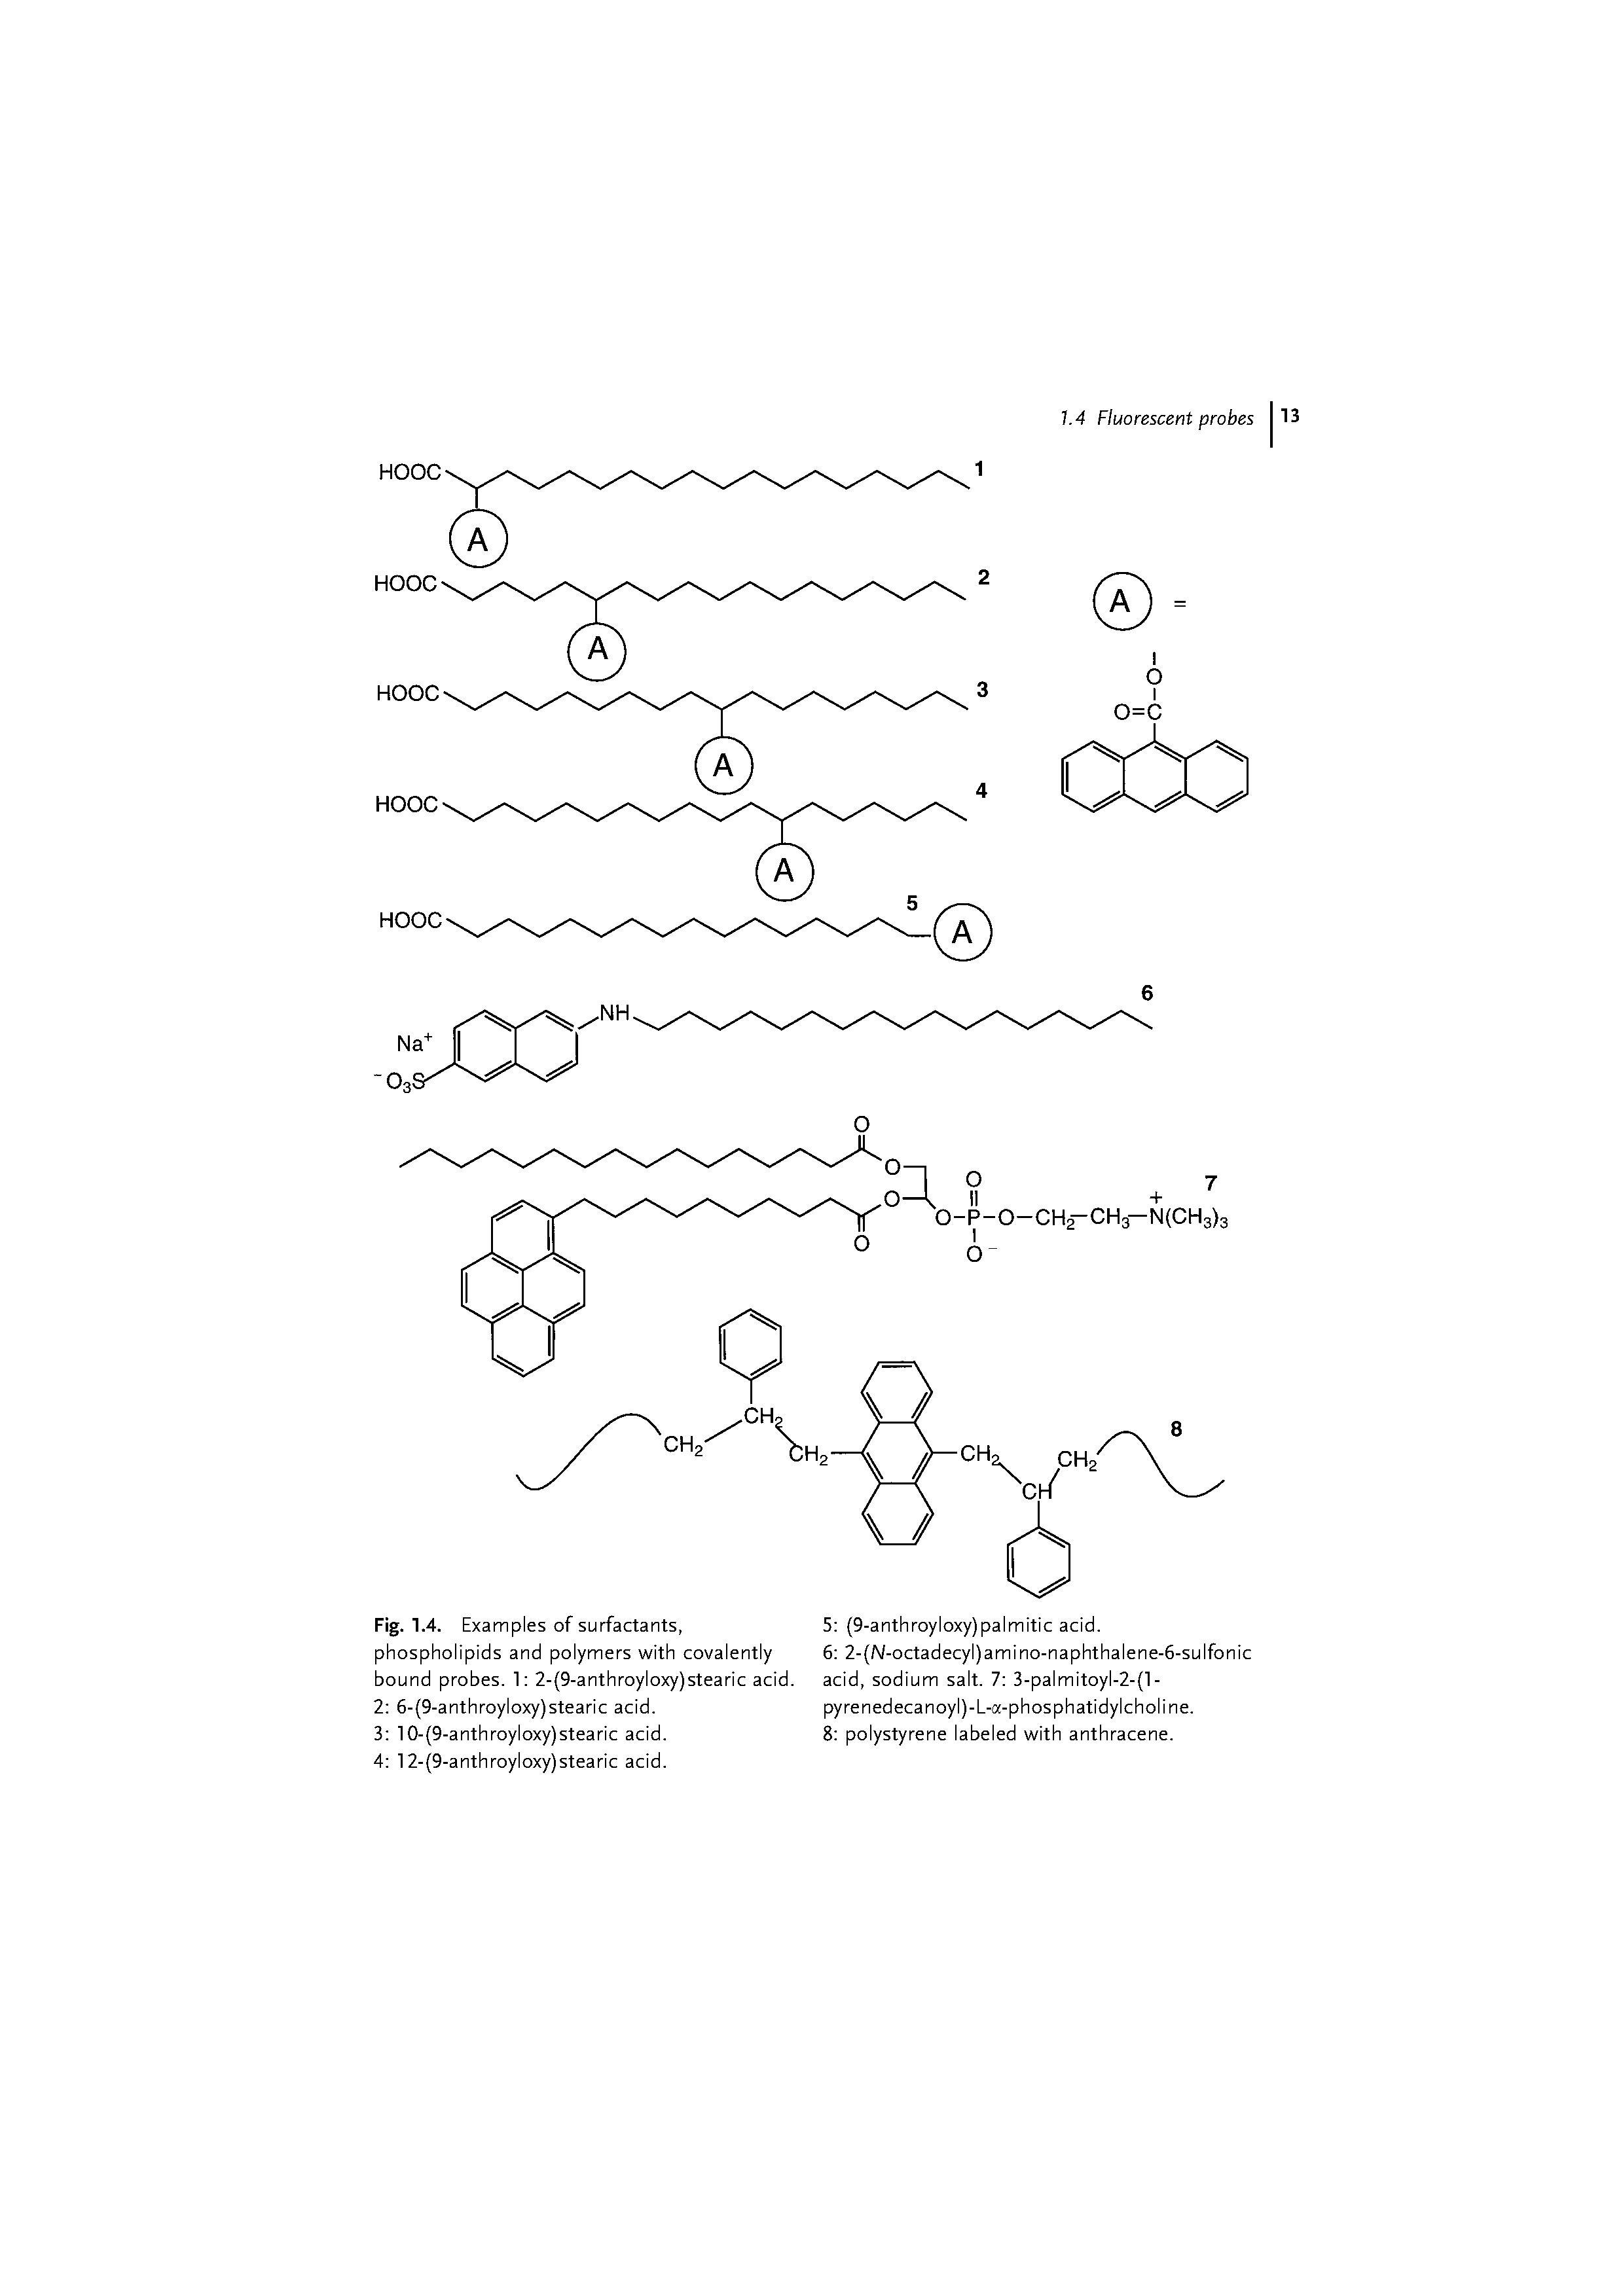 Fig. 1.4. Examples of surfactants, phospholipids and polymers with covalently bound probes. 1 2-(9-anthroyloxy)stearic acid. 2 6-(9-anthroyloxy)stearic acid.